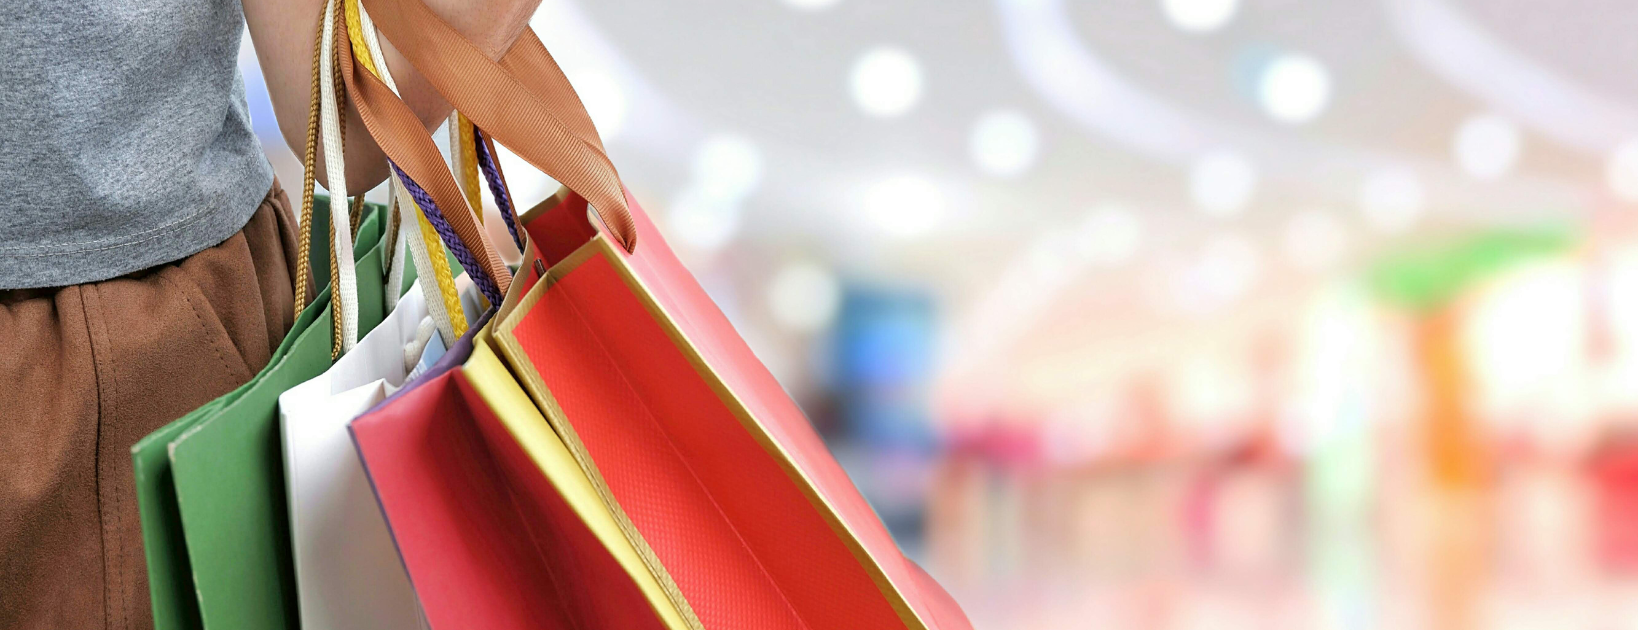 The Role of Compliance in the Retail Industry - 10 Ways to Stay Compliant